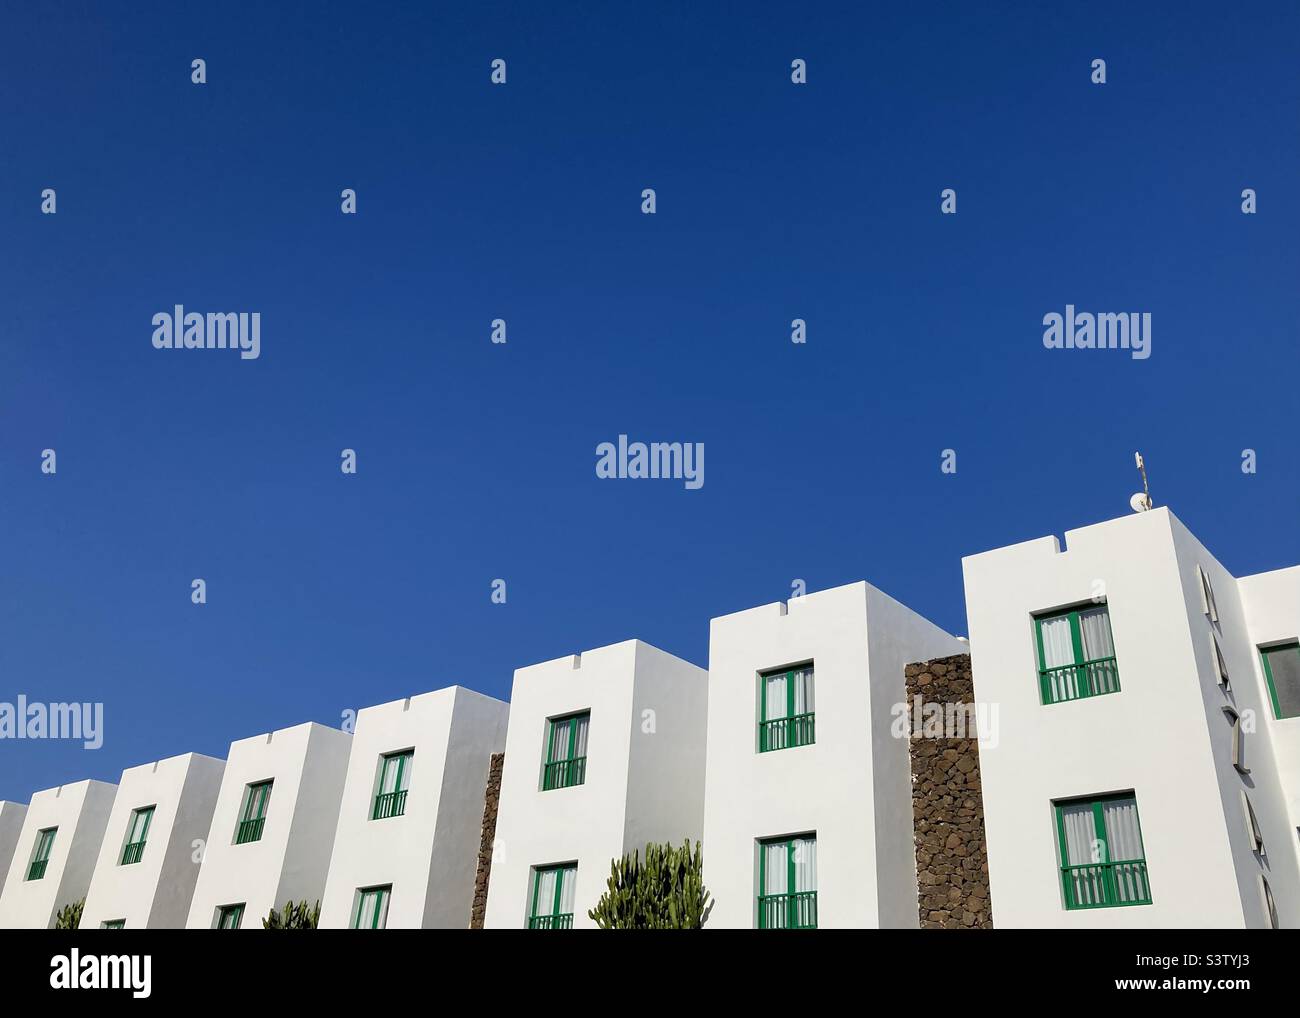 Row of buildings in Costa Teguise, Lanzarote Stock Photo